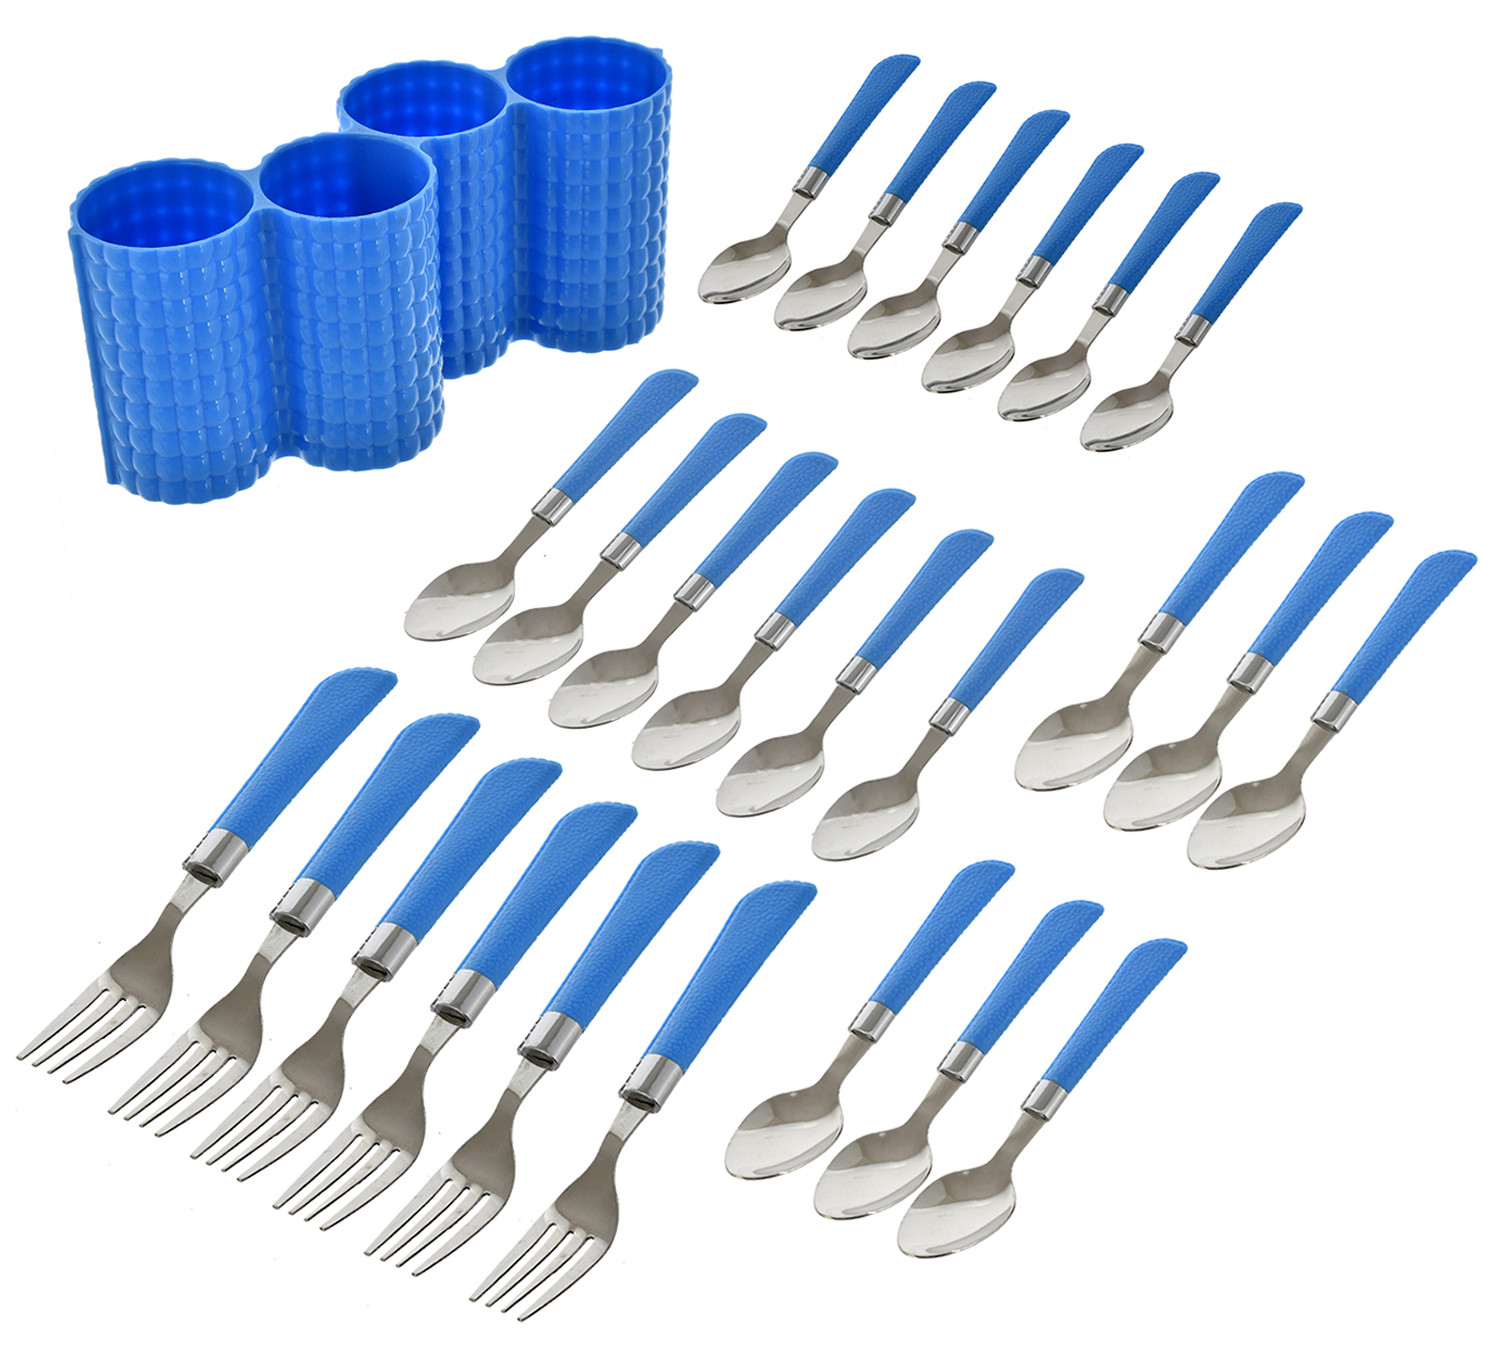 Kuber Industries ABS Plastic & Stainless Steel Nice Cutlery Set, 6 Dessert Spoon, 6 Fork, 6 Soup Spoon, 6 Tea Spoon With 1 Stand (Set of 24, Blue)-KUBMART3296